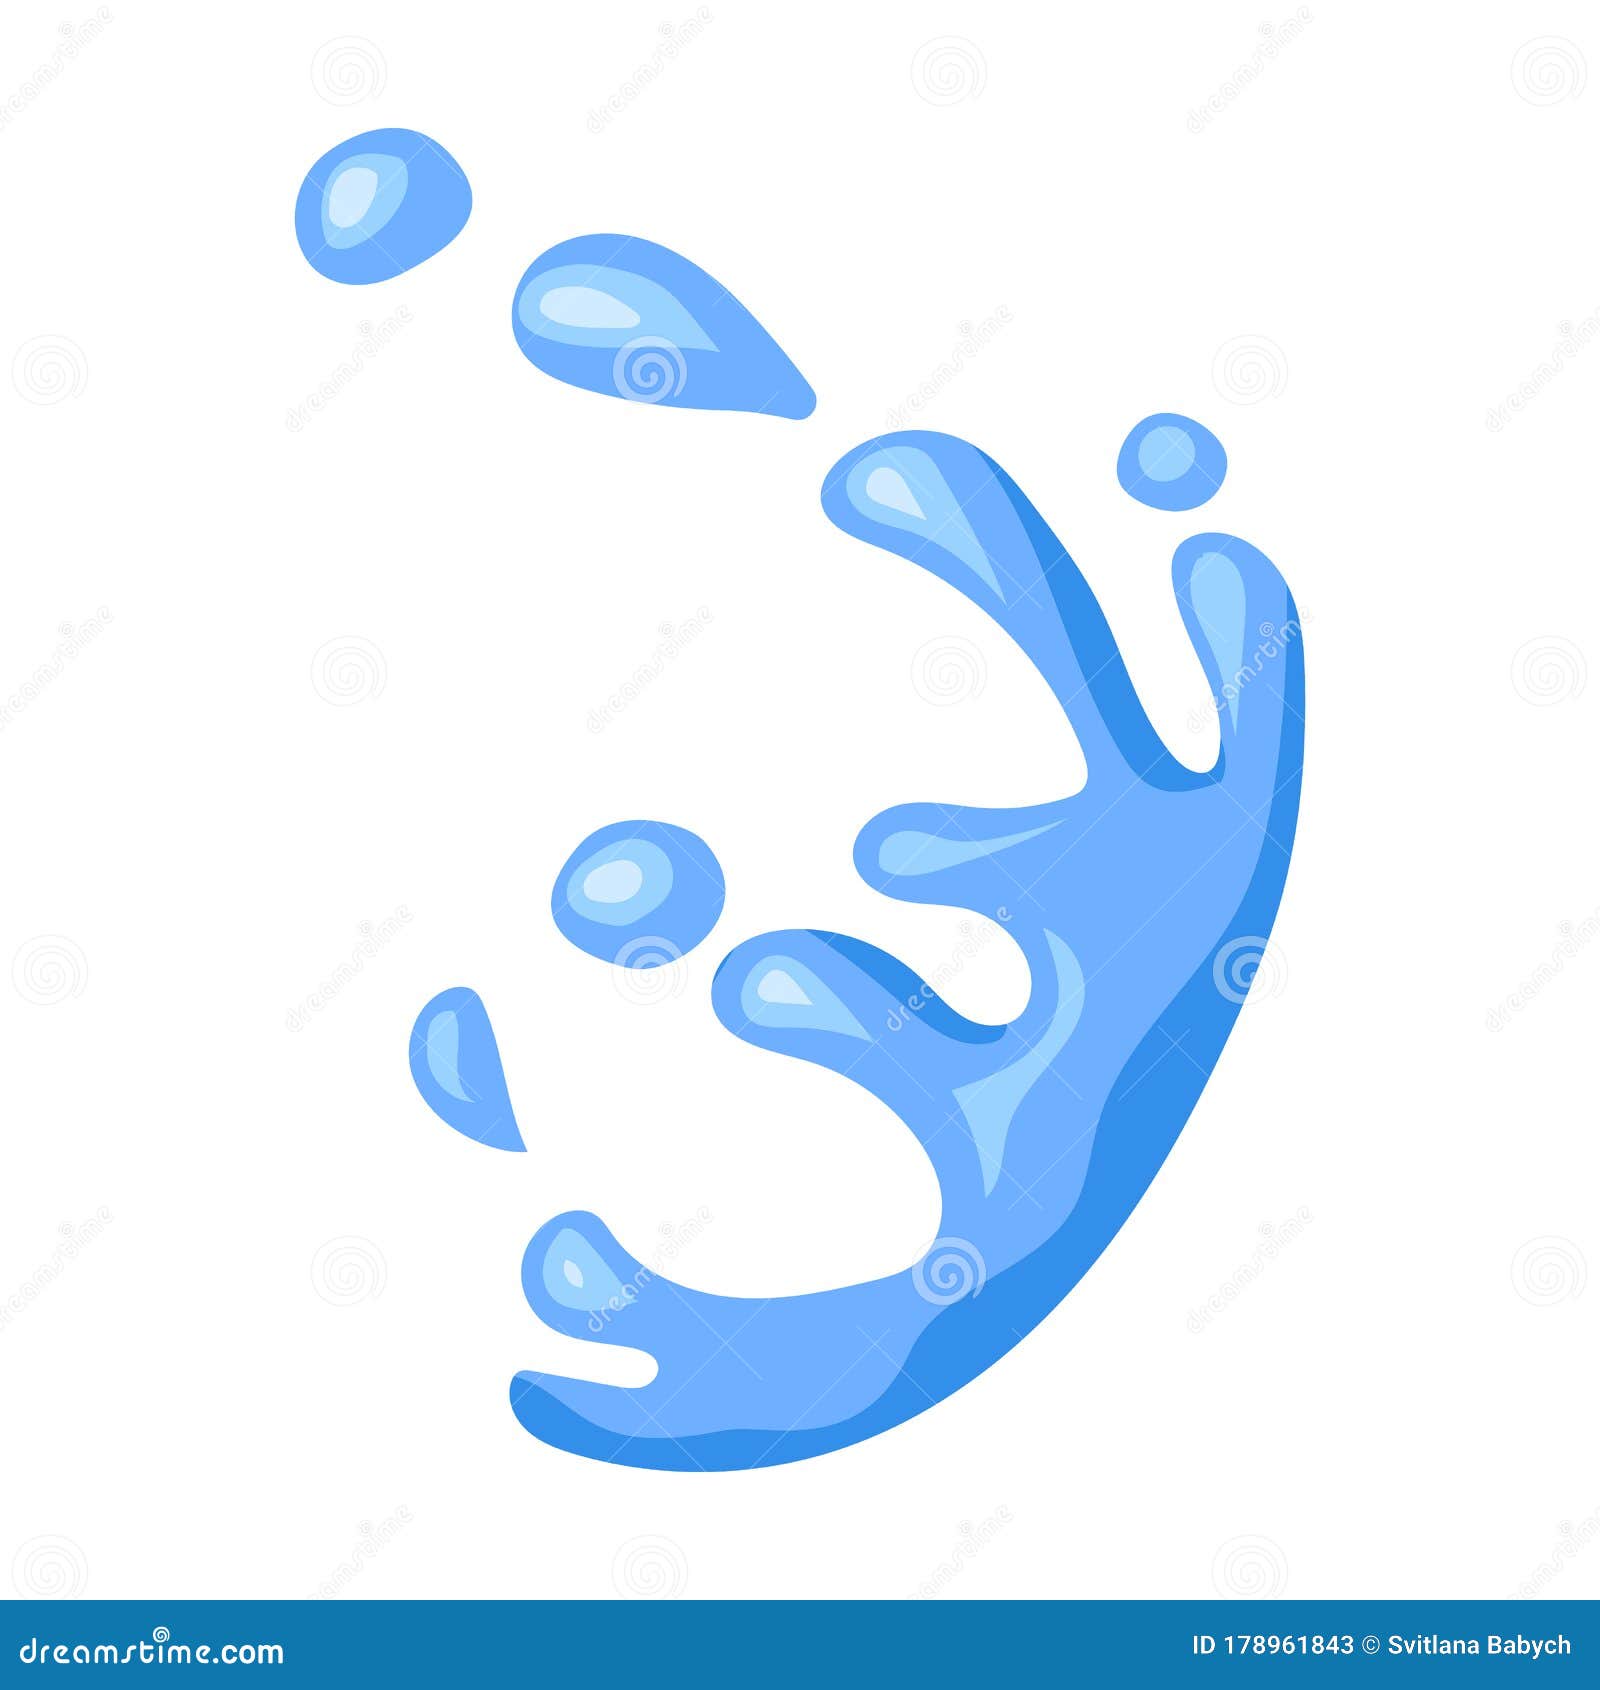 Water Splash Vector  Vector Icon Isolated on White Background Water  Splash. Stock Vector - Illustration of drop, flowing: 178961843